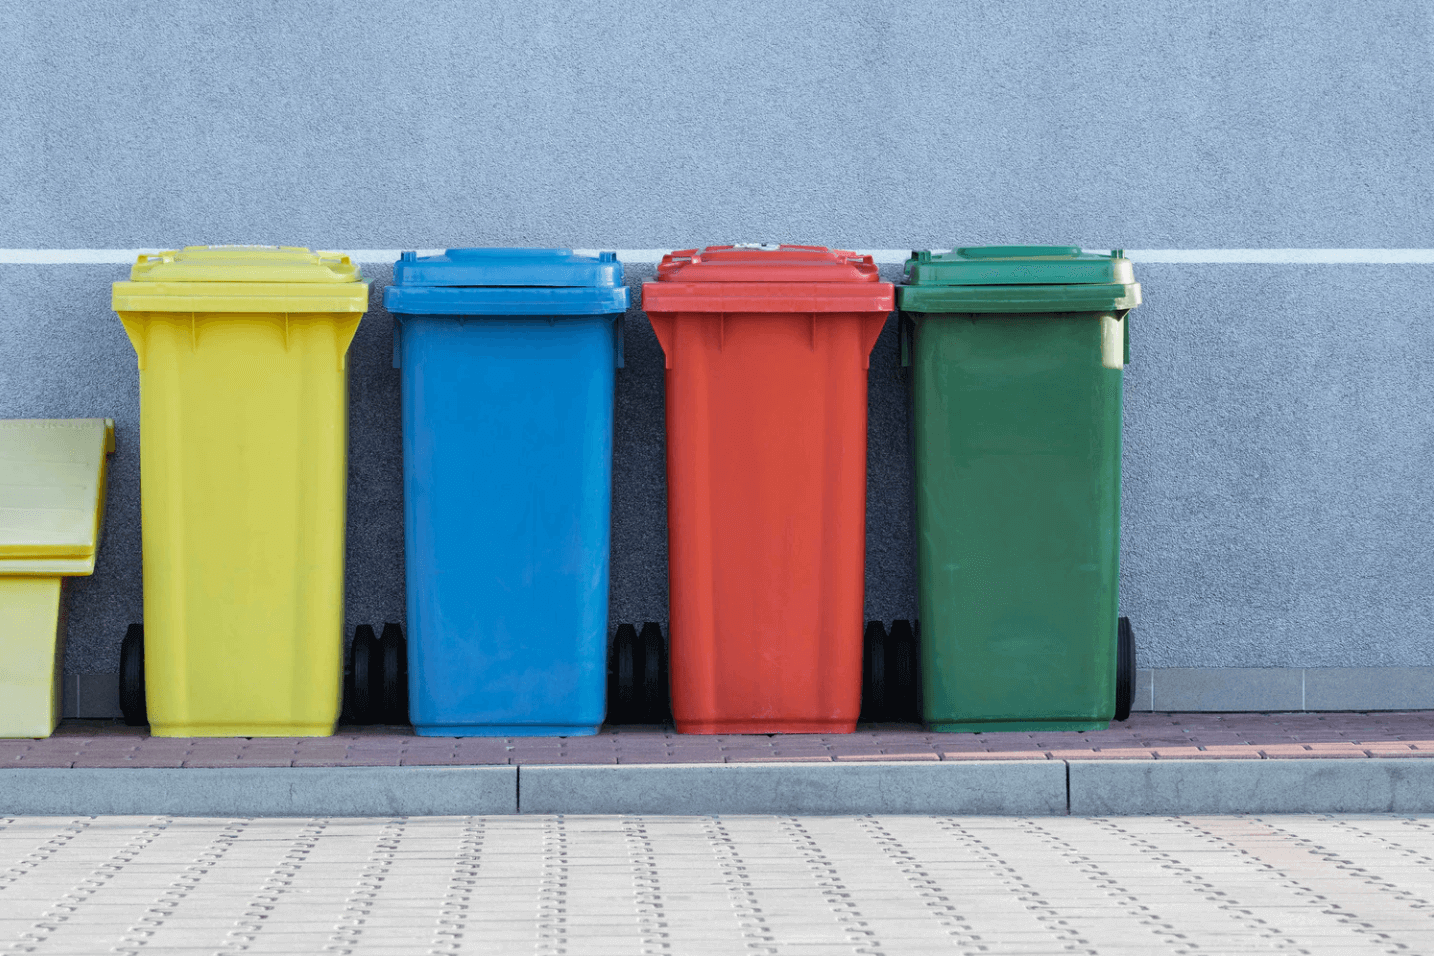 Recycling bins in different colors.